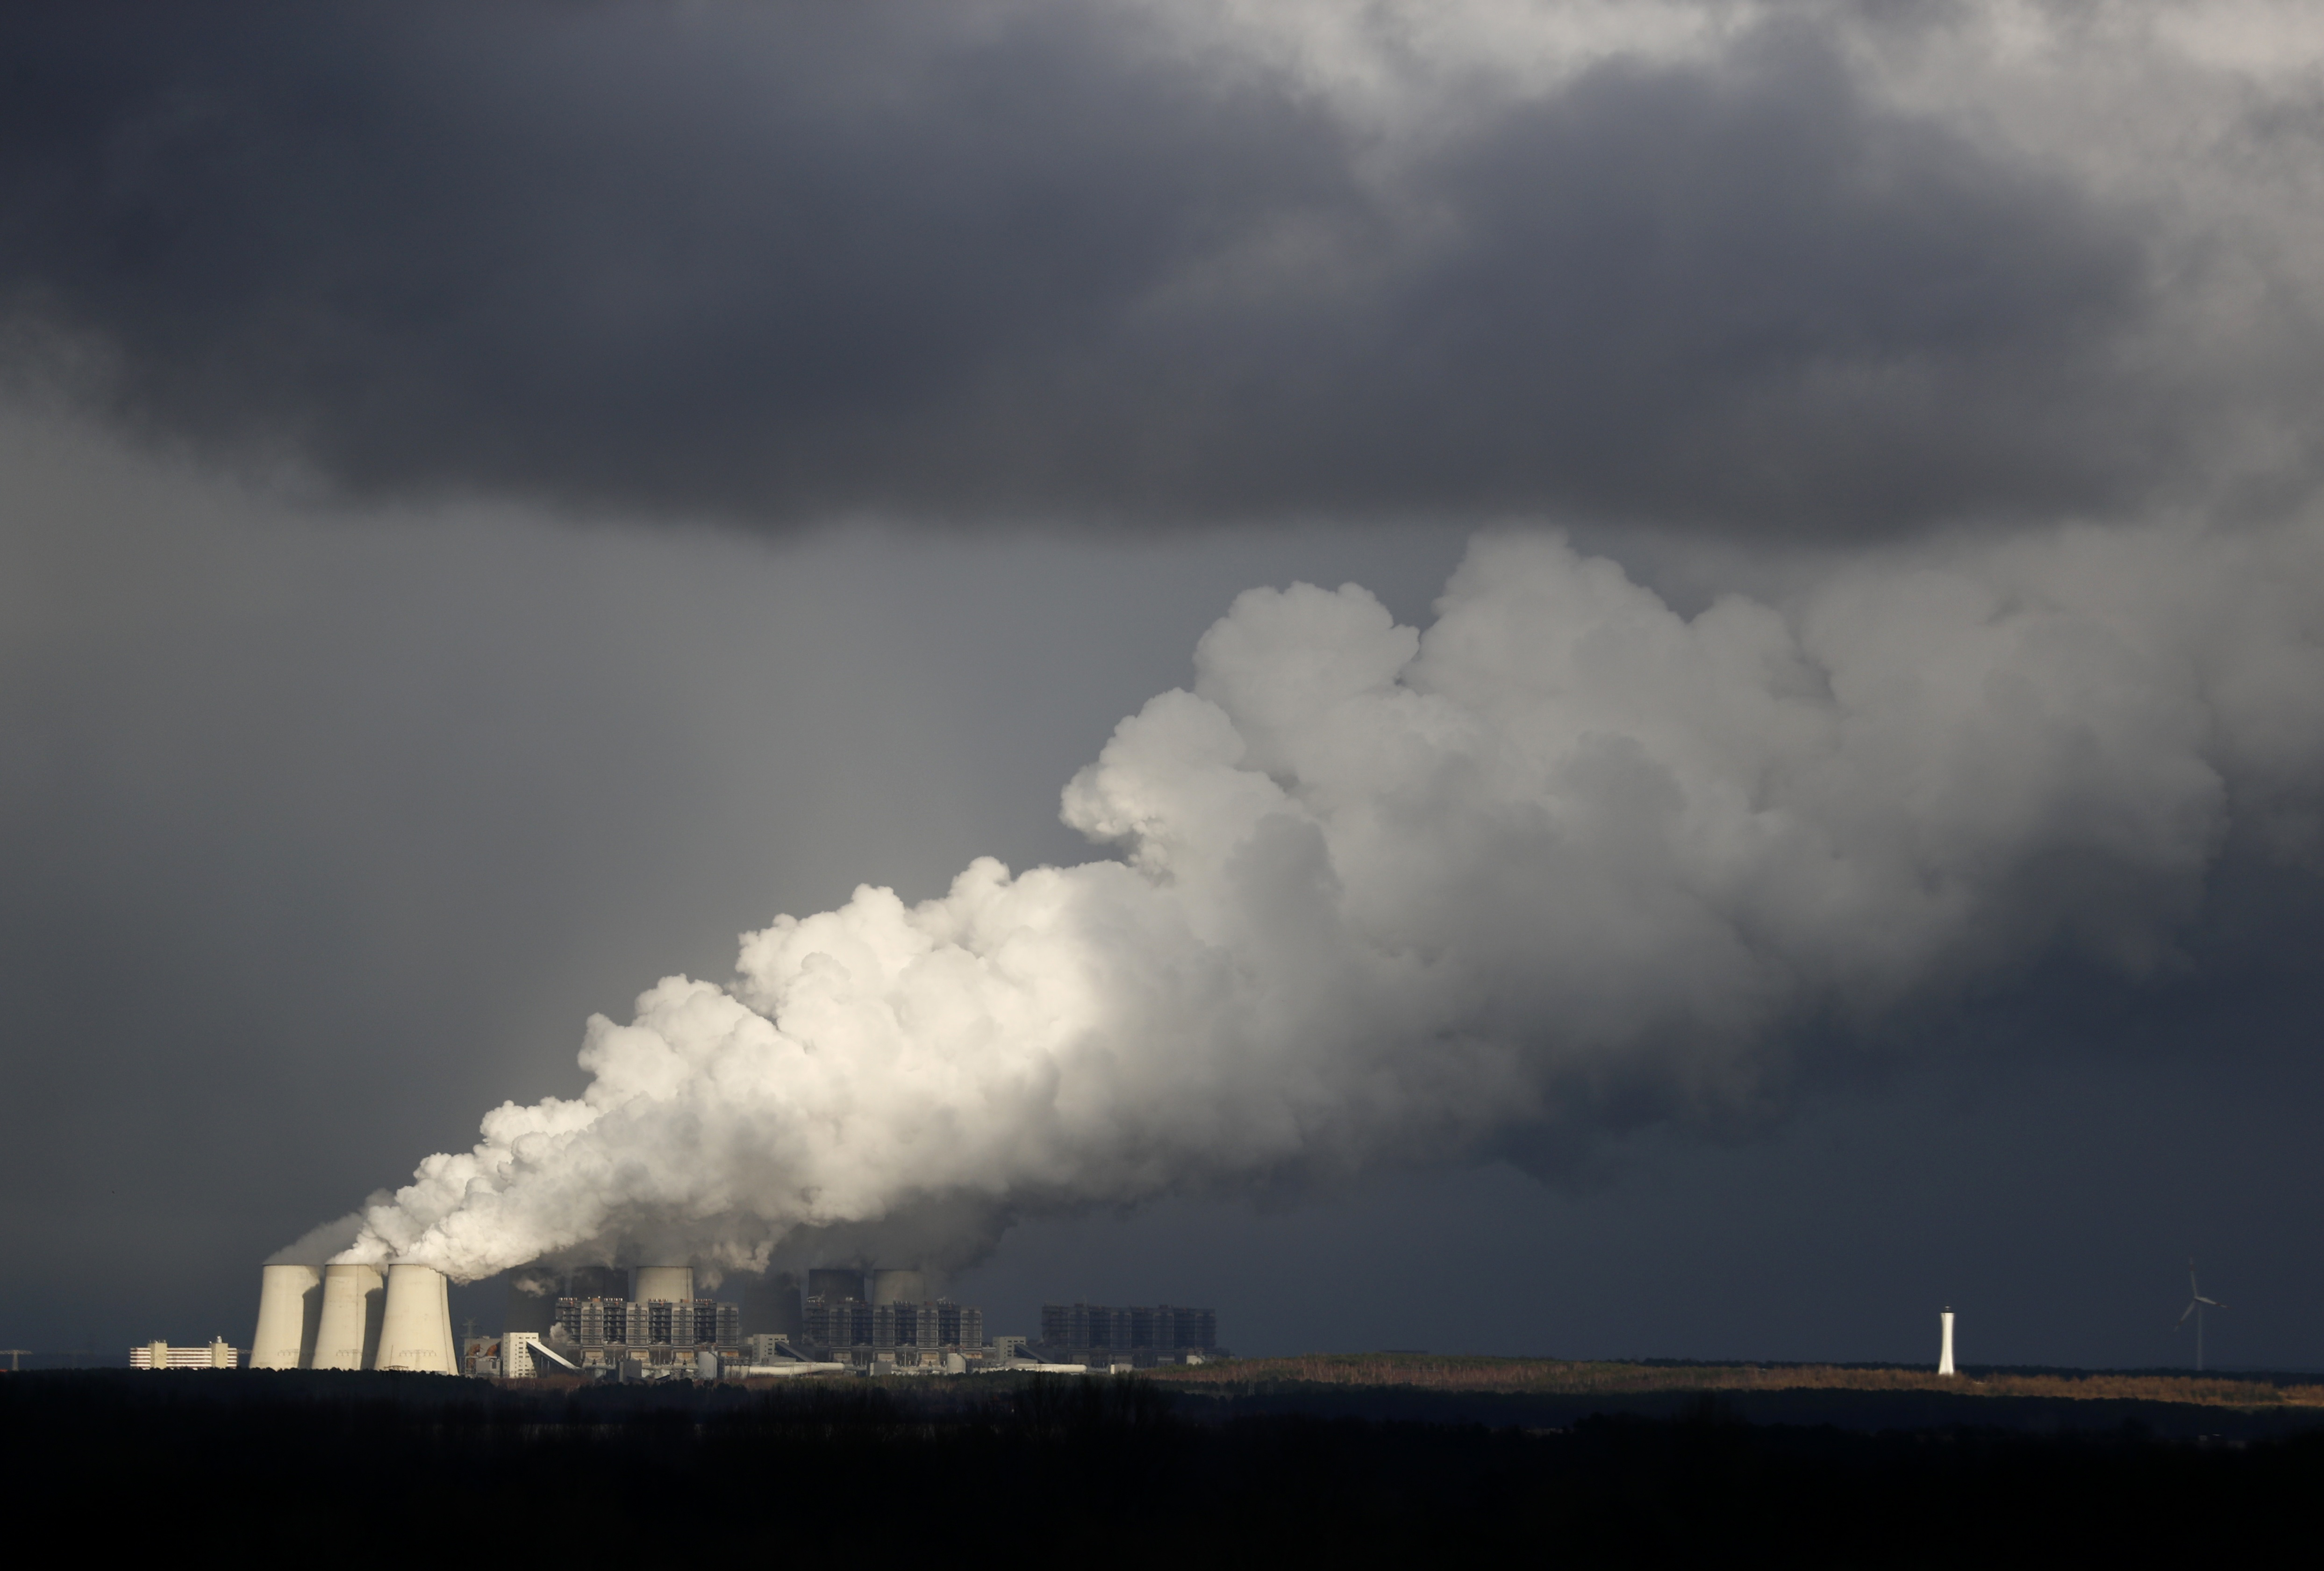 Smoke rises from the coal power plant in Jaenschwalde